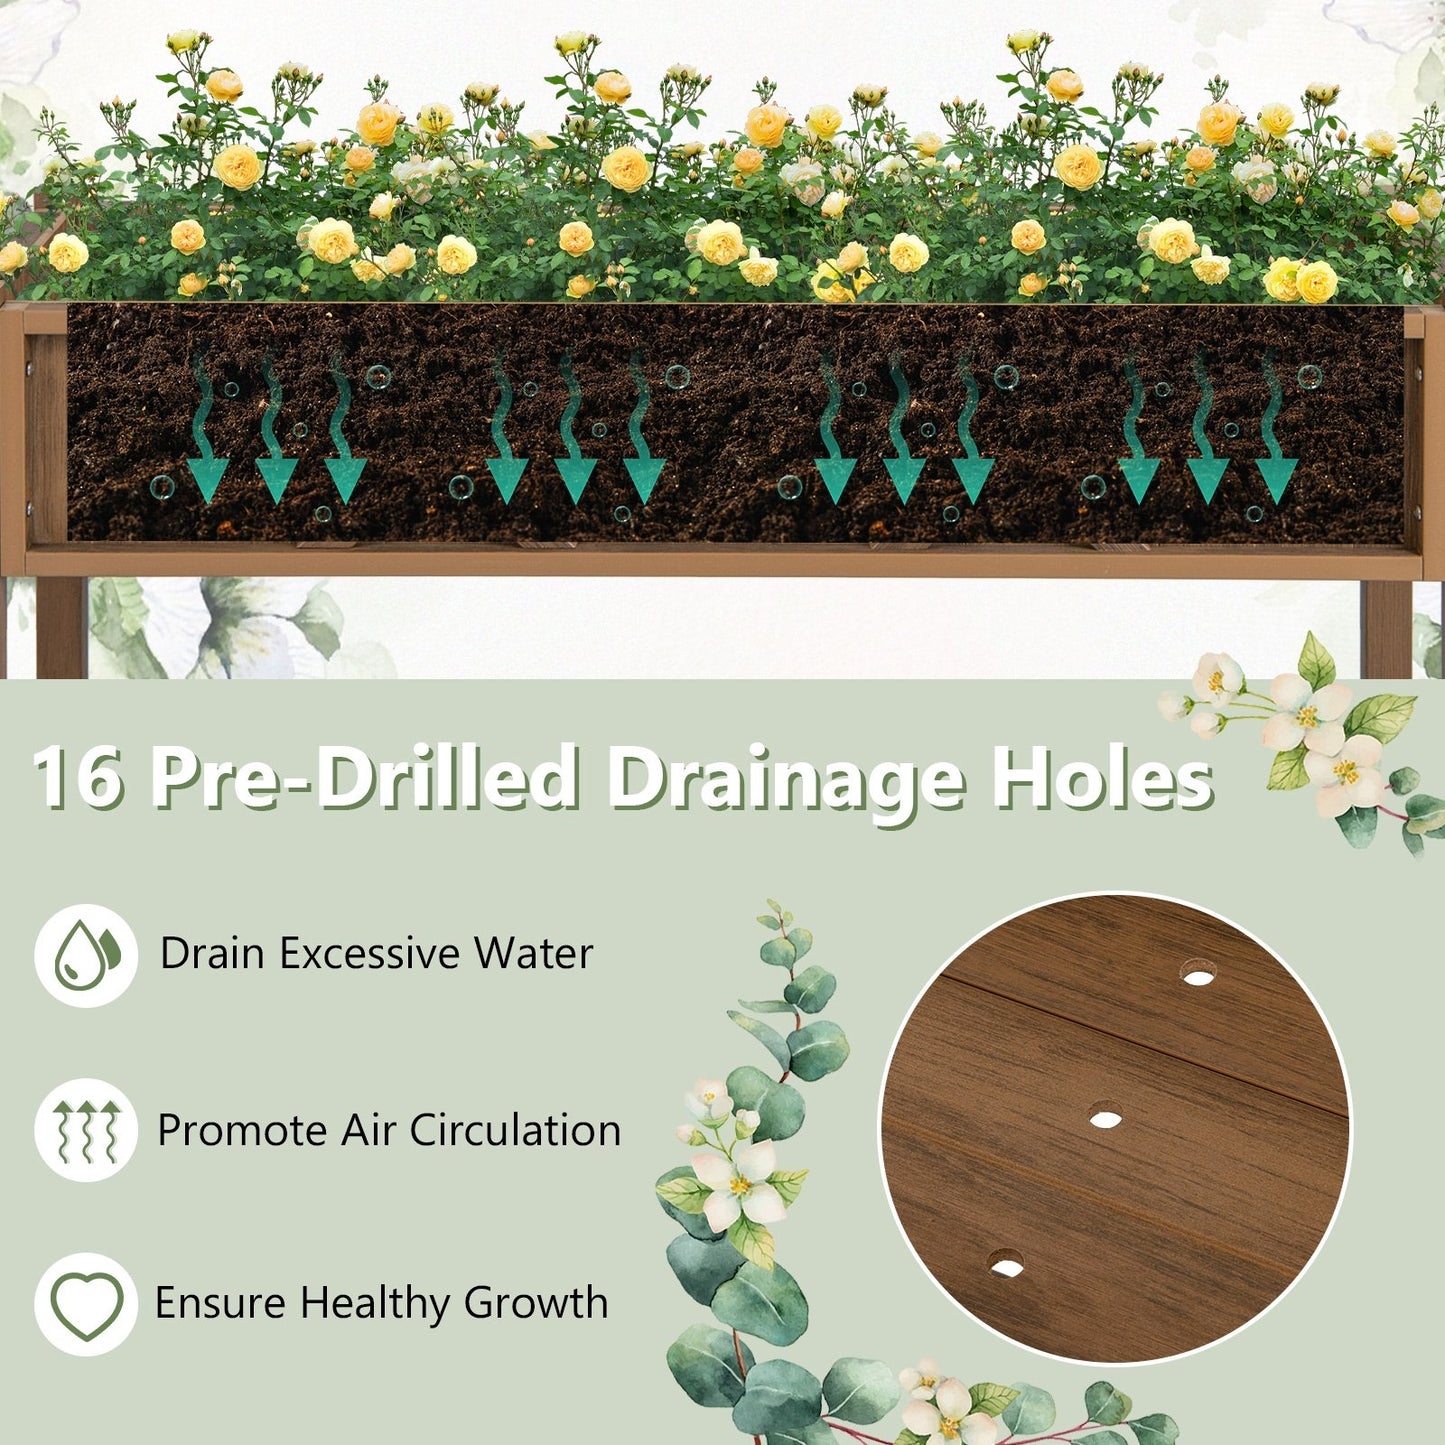 Poly Wood Elevated Planter Box with Legs Storage Shelf Drainage Holes, Coffee